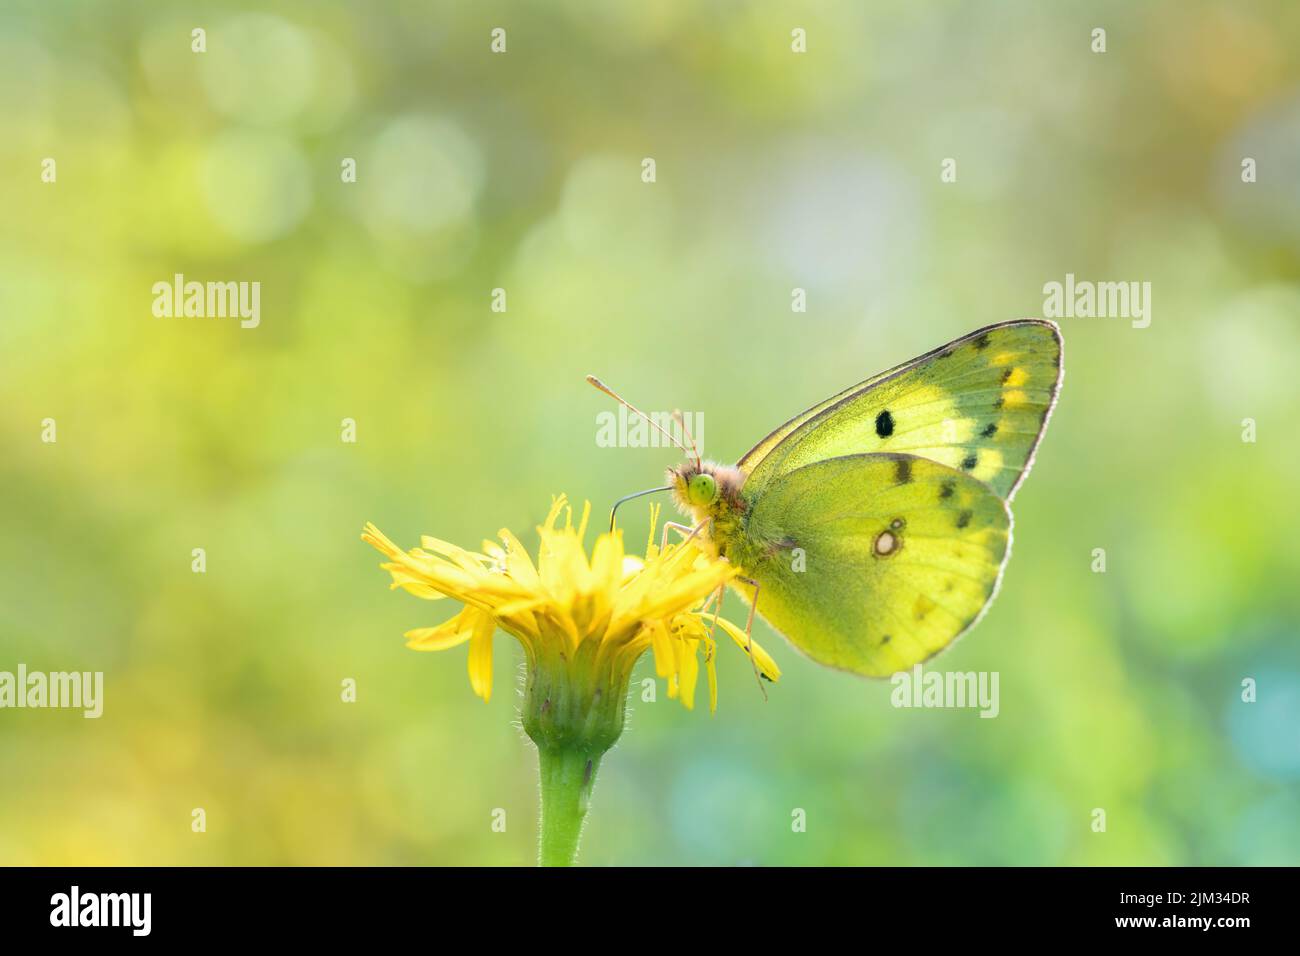 Clouded yellow butterfly (Colias hyale or Colias alfacariensis). The species could only be differed from the caterpillars. Stock Photo